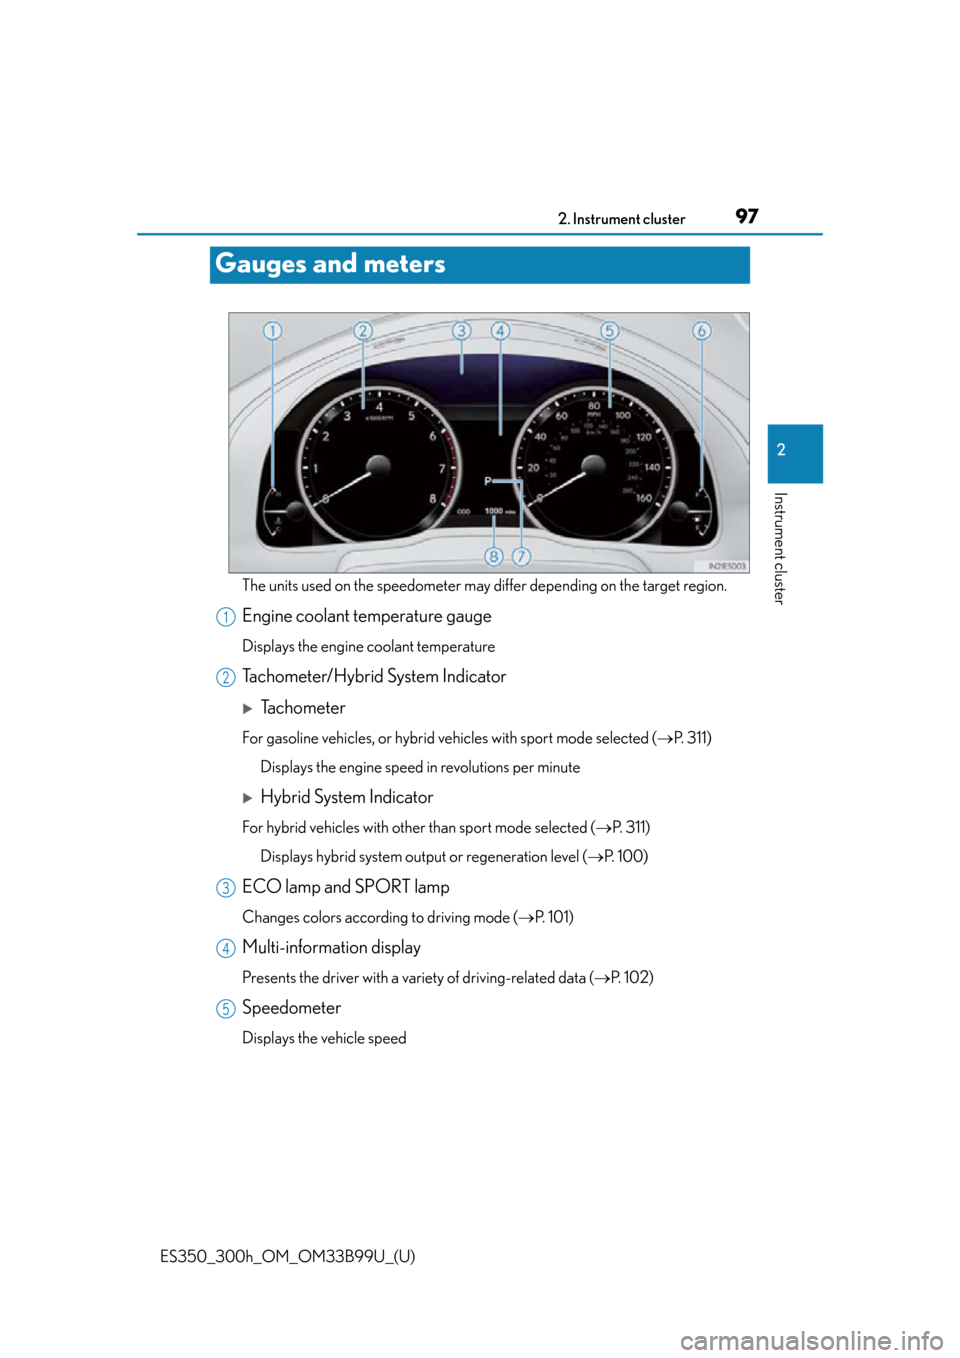 Lexus ES300h 2015  Do-it-yourself maintenance / Owners Manual (OM33B99U) 97
ES350_300h_OM_OM33B99U_(U)
2. Instrument cluster
2
Instrument cluster
Gauges and meters
The units used on the speedometer may differ depending on the target region.
Engine coolant temperature gauge